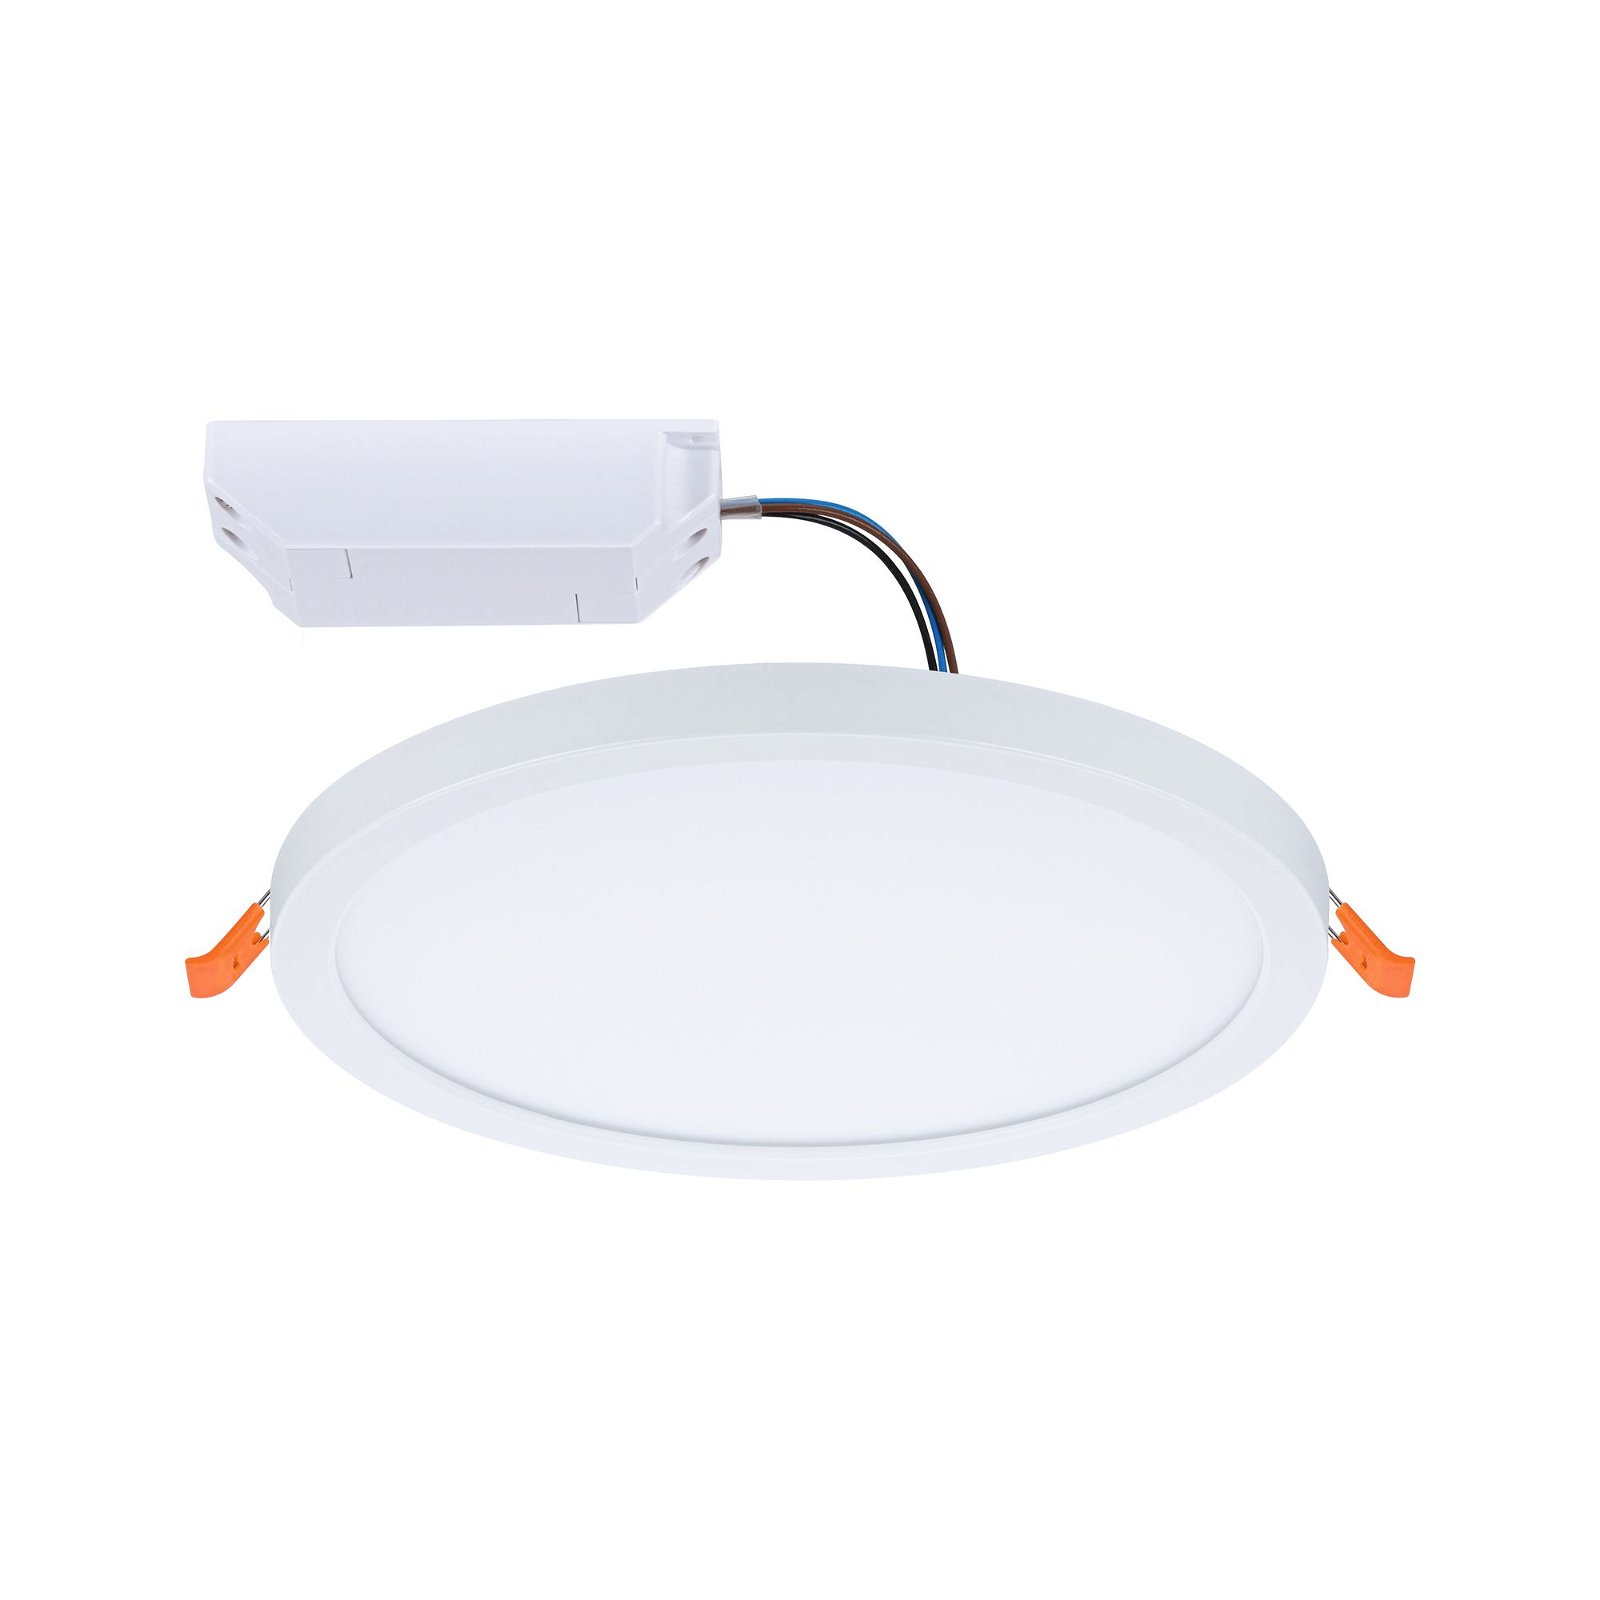 VariFit LED Recessed panel Smart Home Zigbee Areo IP44 round 175mm 13W 1200lm Tunable White White dimmable